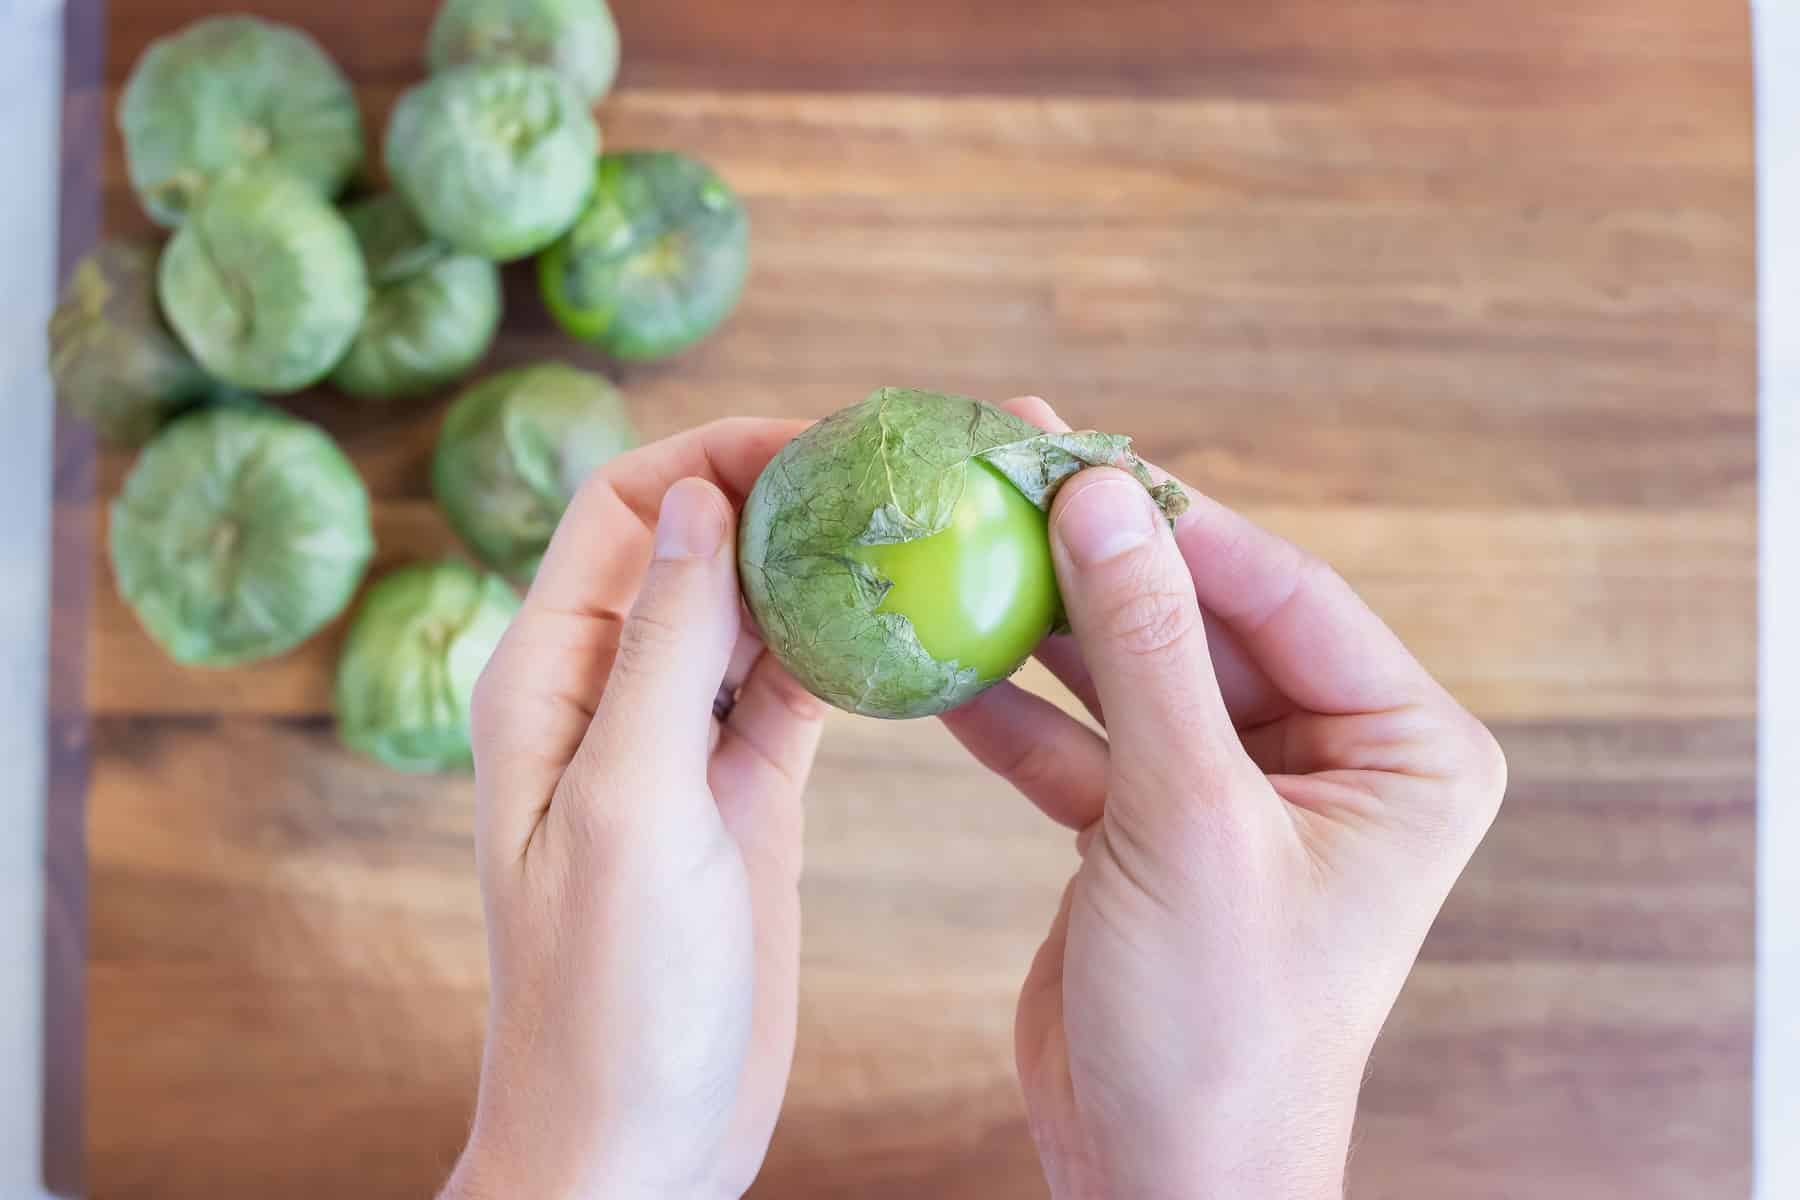 A hand removes the husk of a tomatillo.